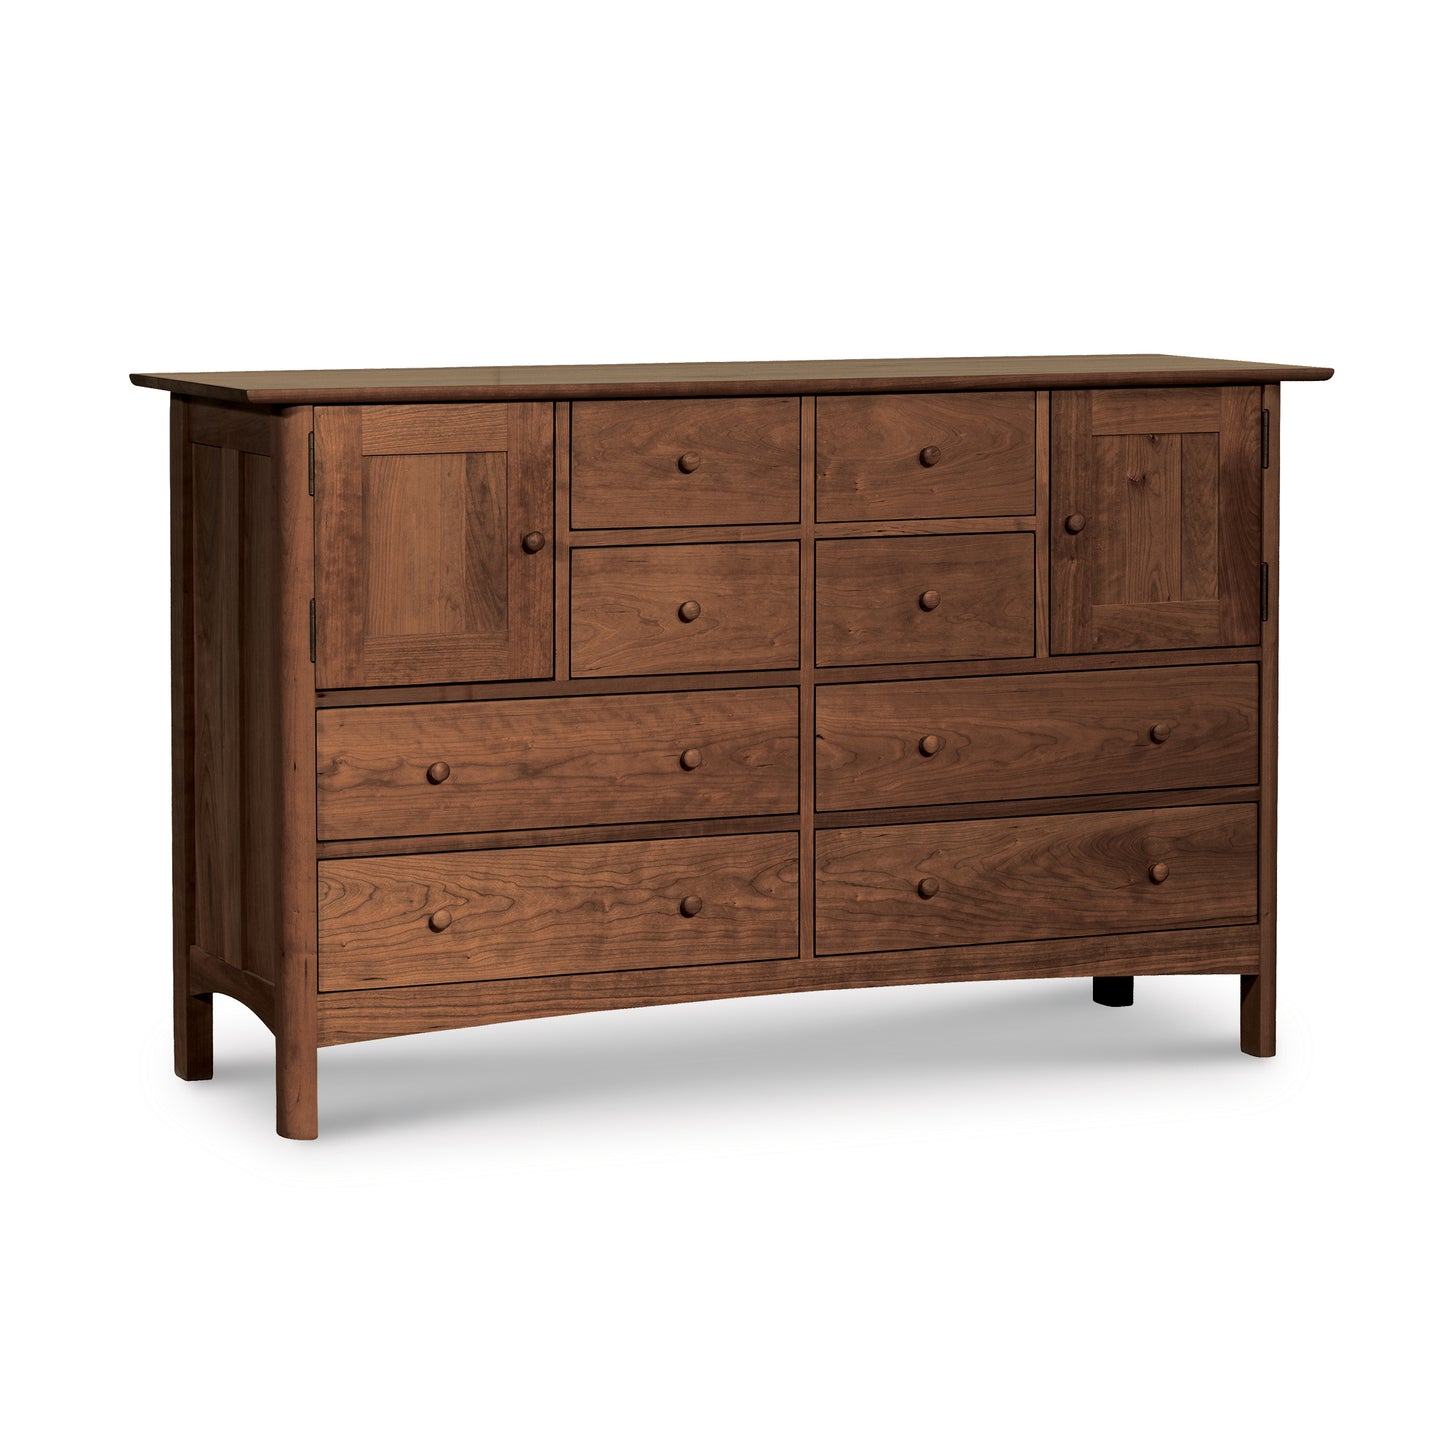 A traditional Vermont Furniture Designs Heartwood Shaker 8-Drawer 2-Door Dresser with multiple drawers of varying sizes on a white background, made from solid cherry maple walnut wood.